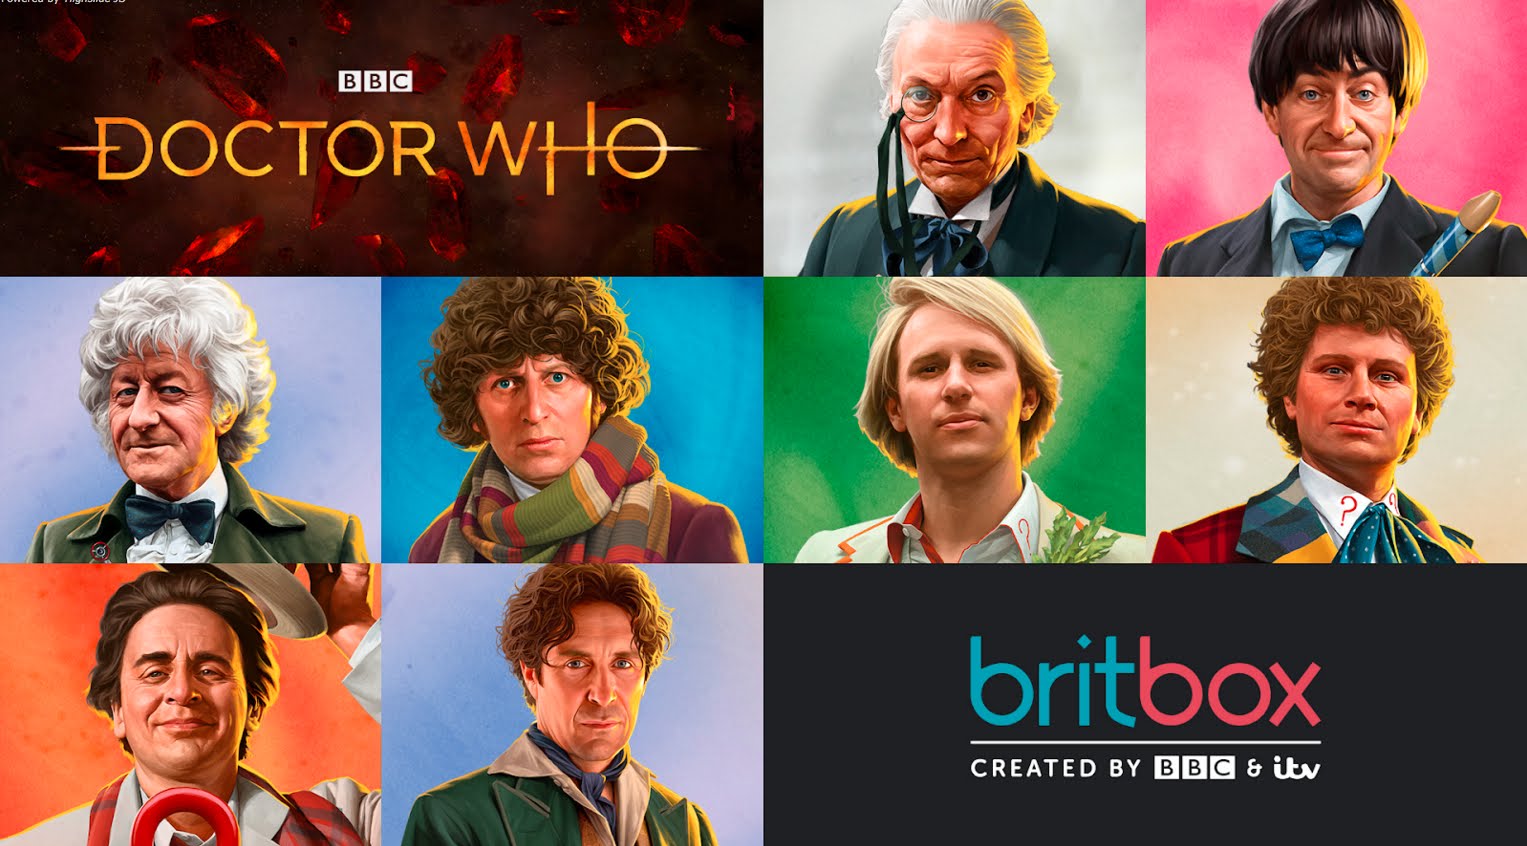 DOCTOR WHO - THE CLASSIC ERAS